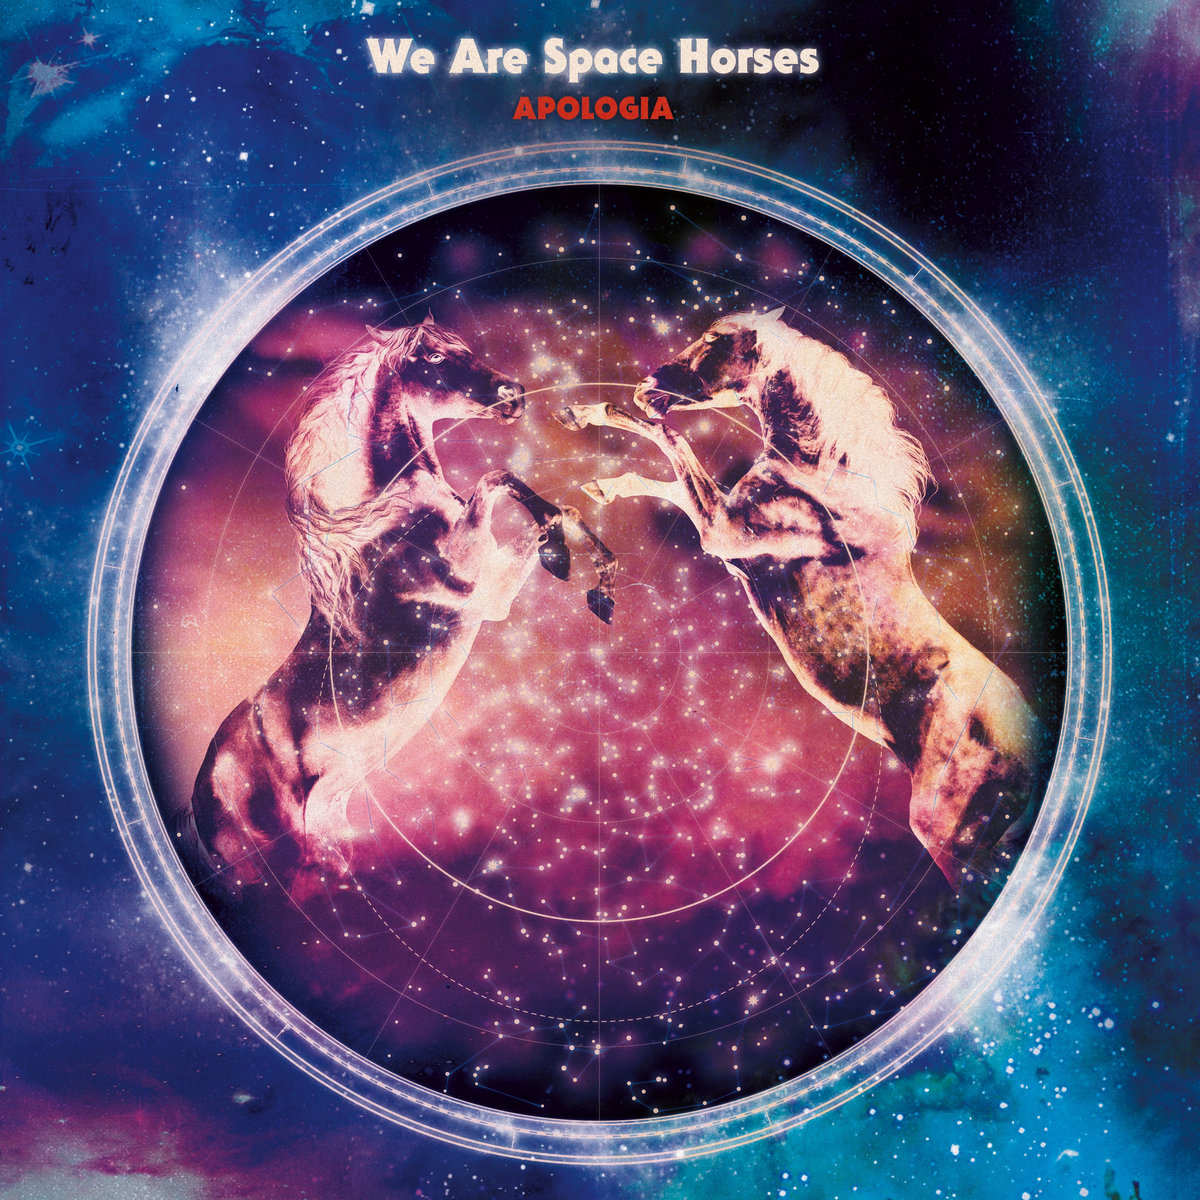 Album Review: Apologia by We Are Space Horses